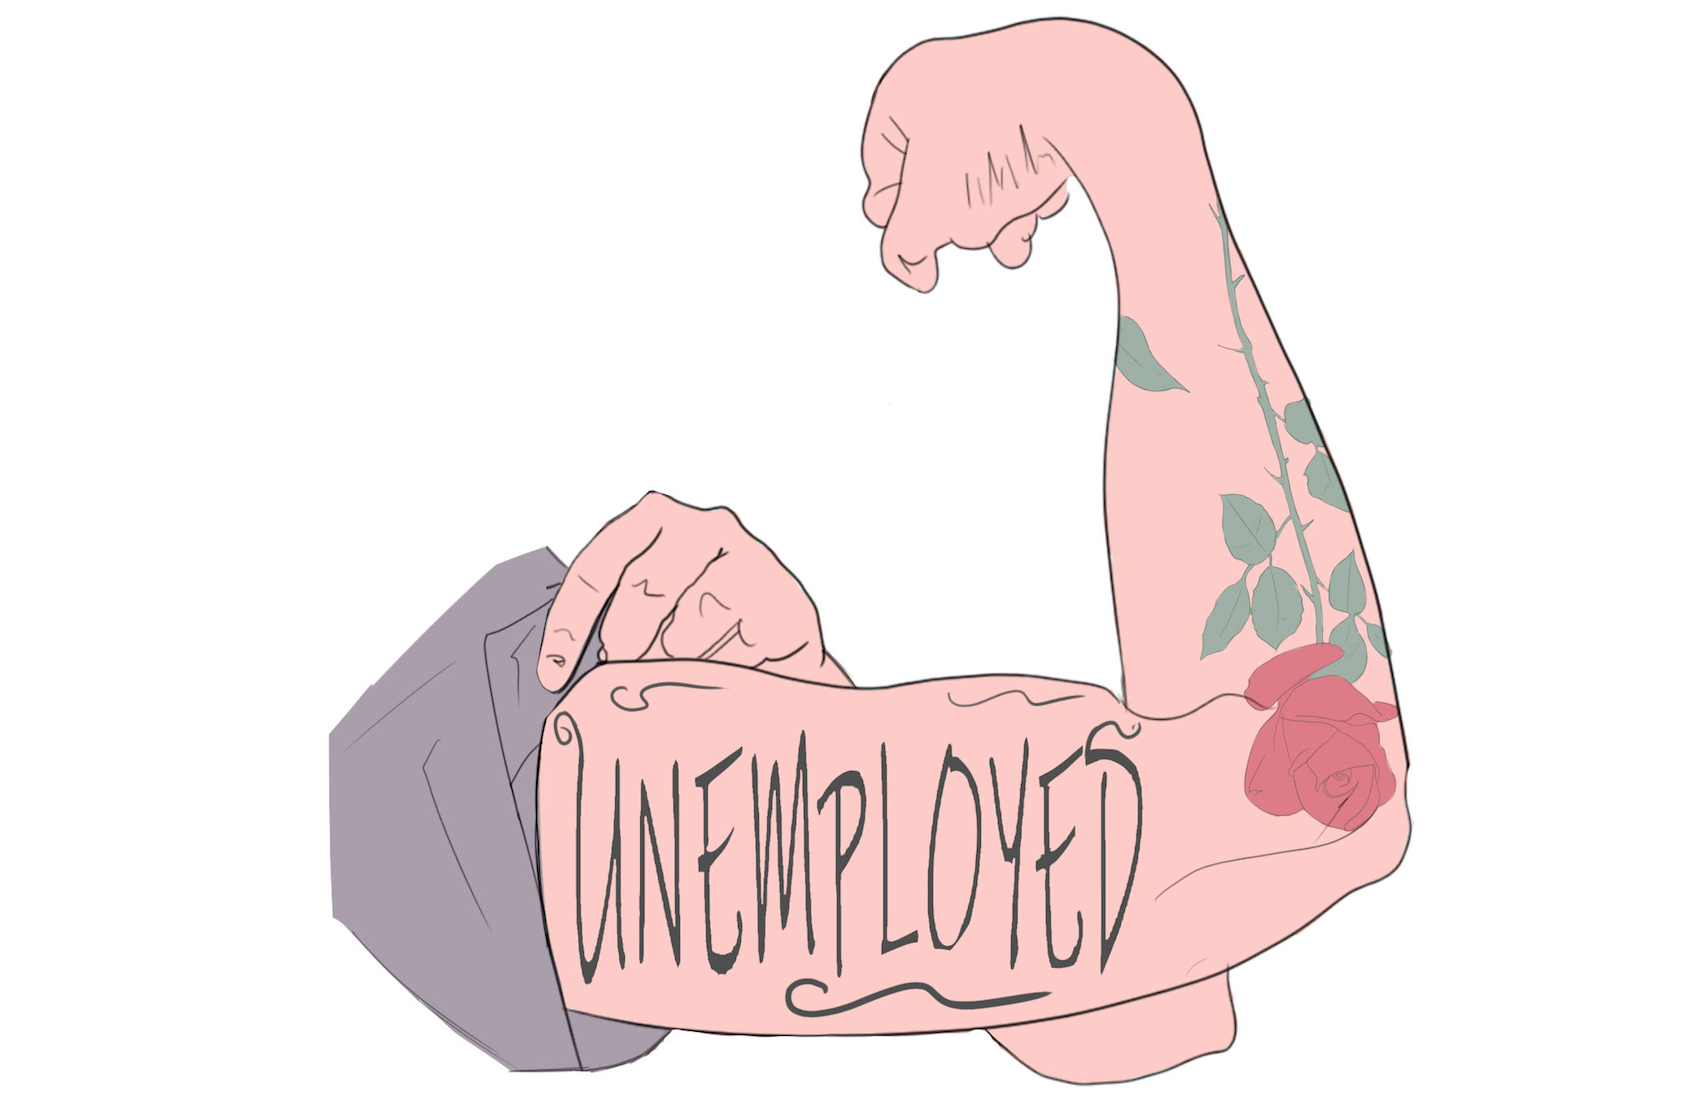 Do Tattoos Affect Your Chances in the Job Market? - Tattoo Cares